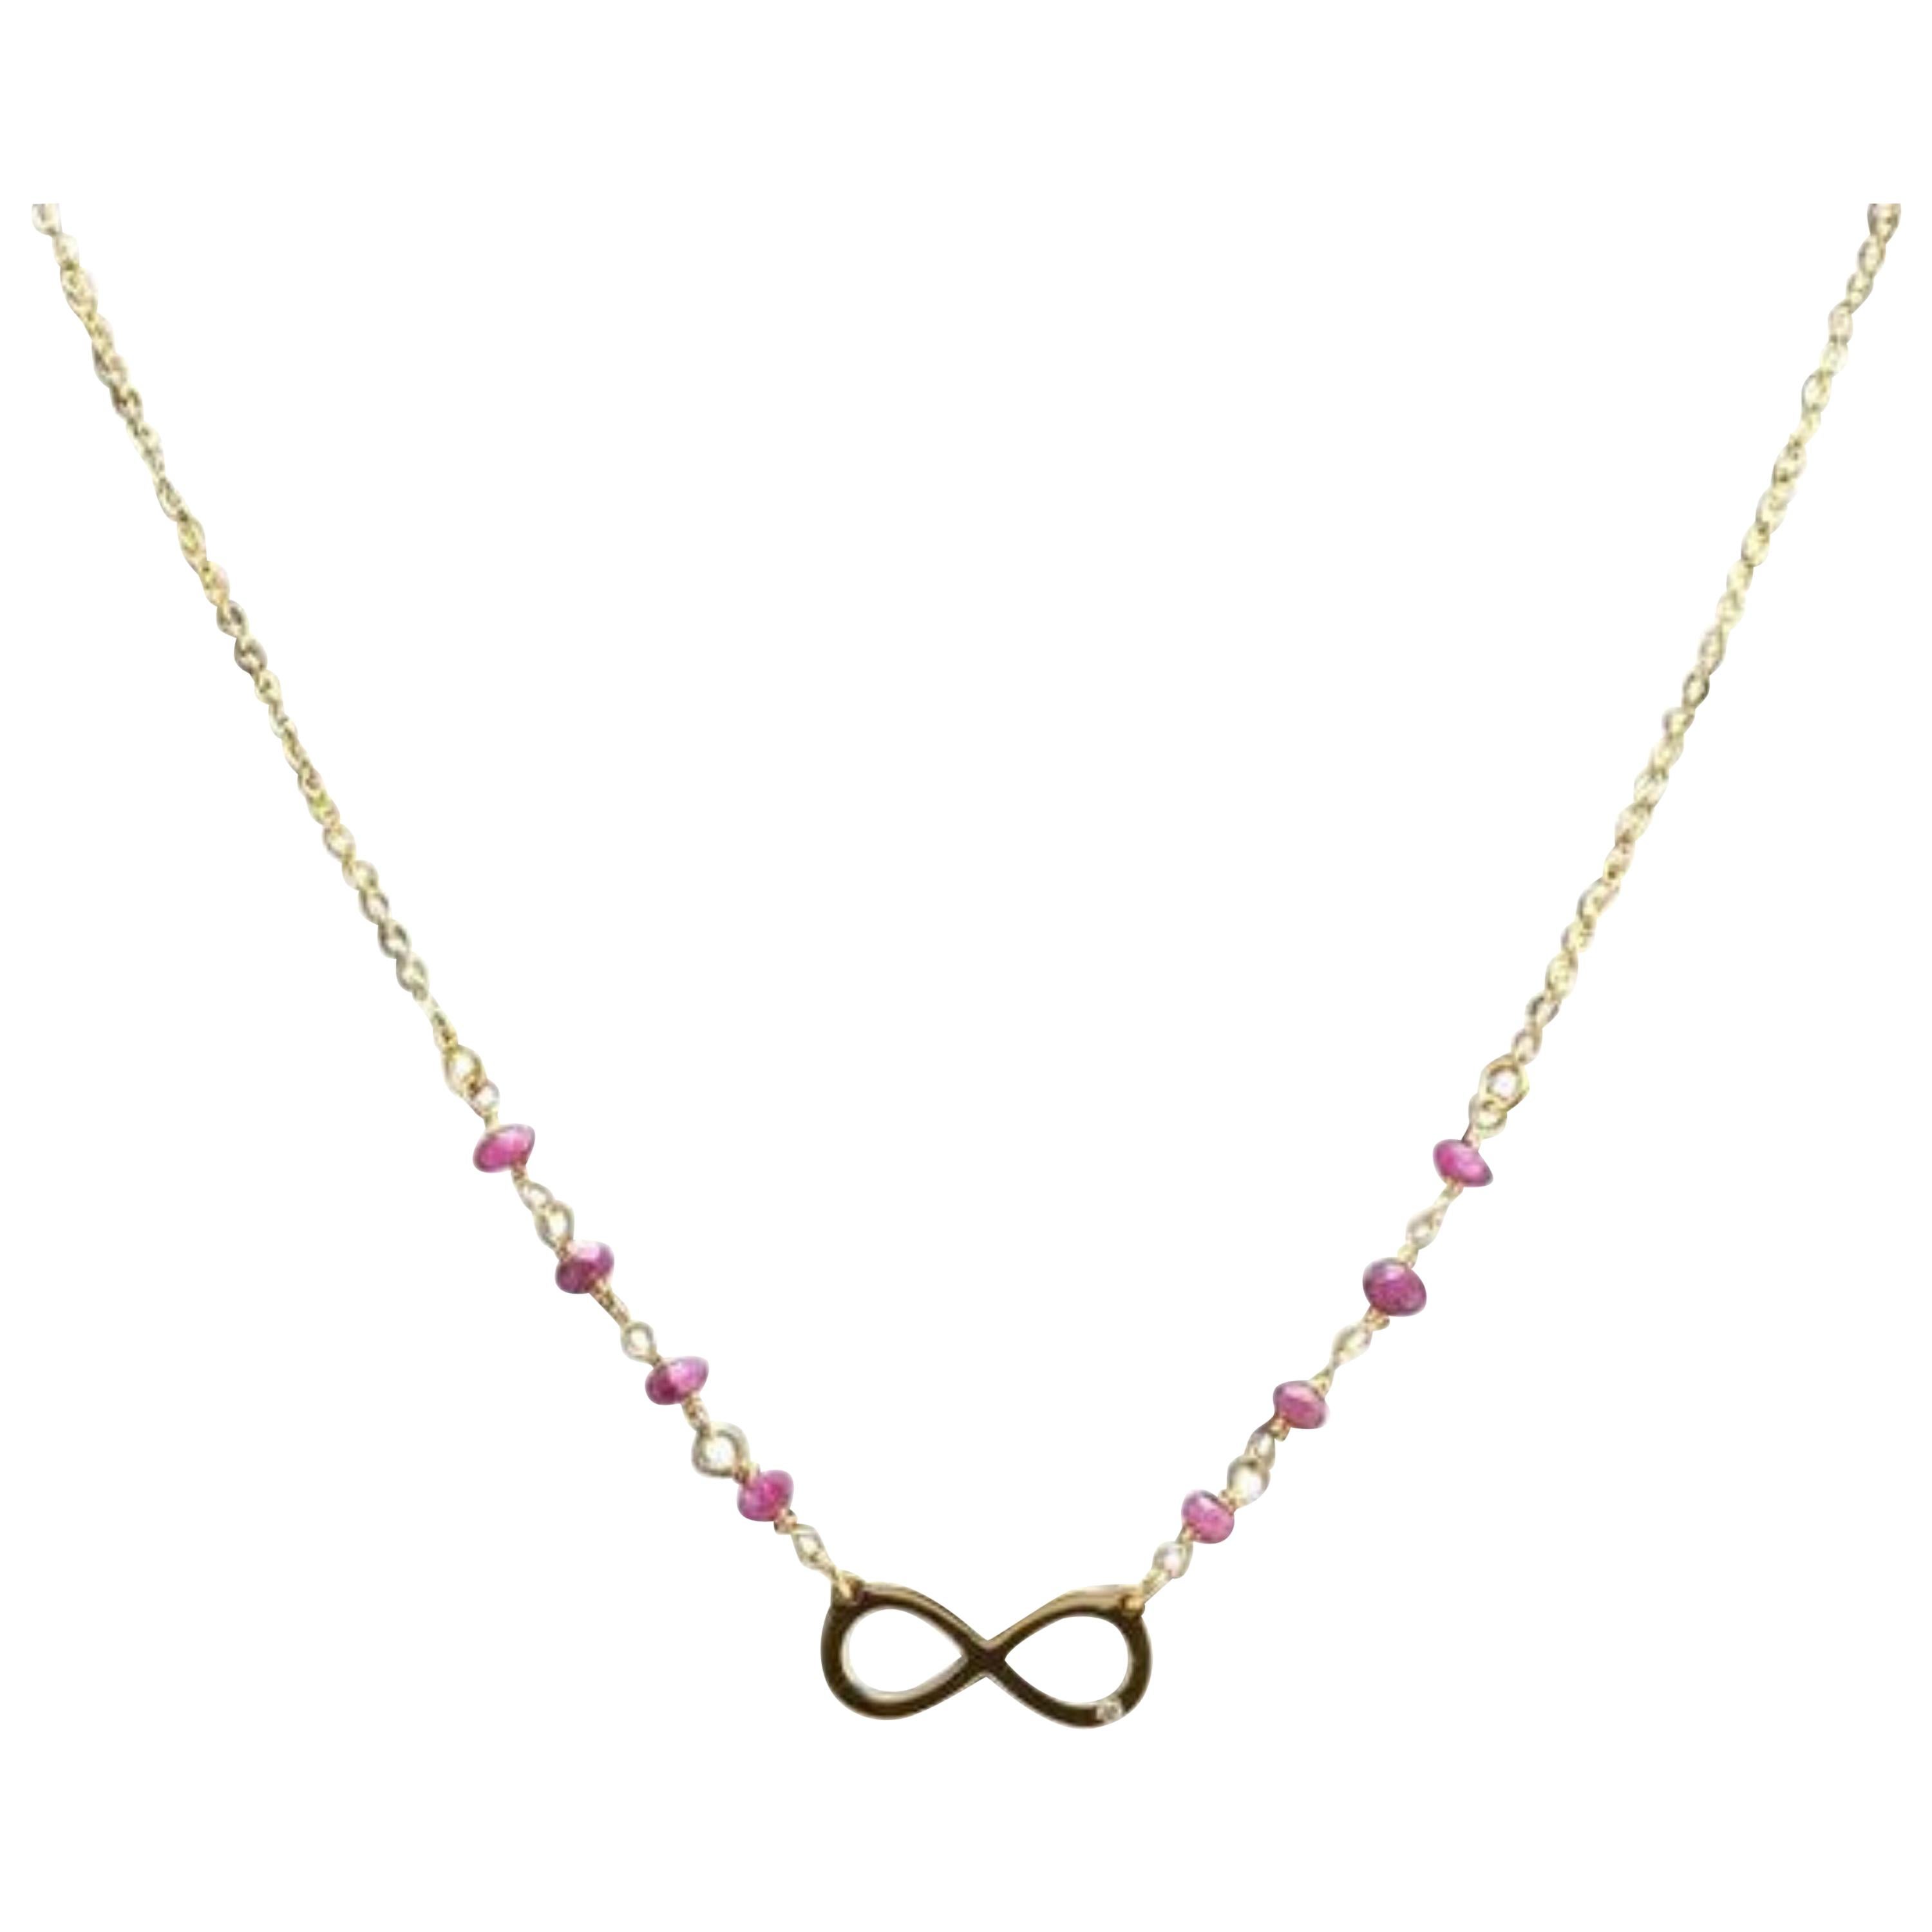 Splendid 14k Solid Yellow Gold Infinity Necklace with Natural Diamond Accent